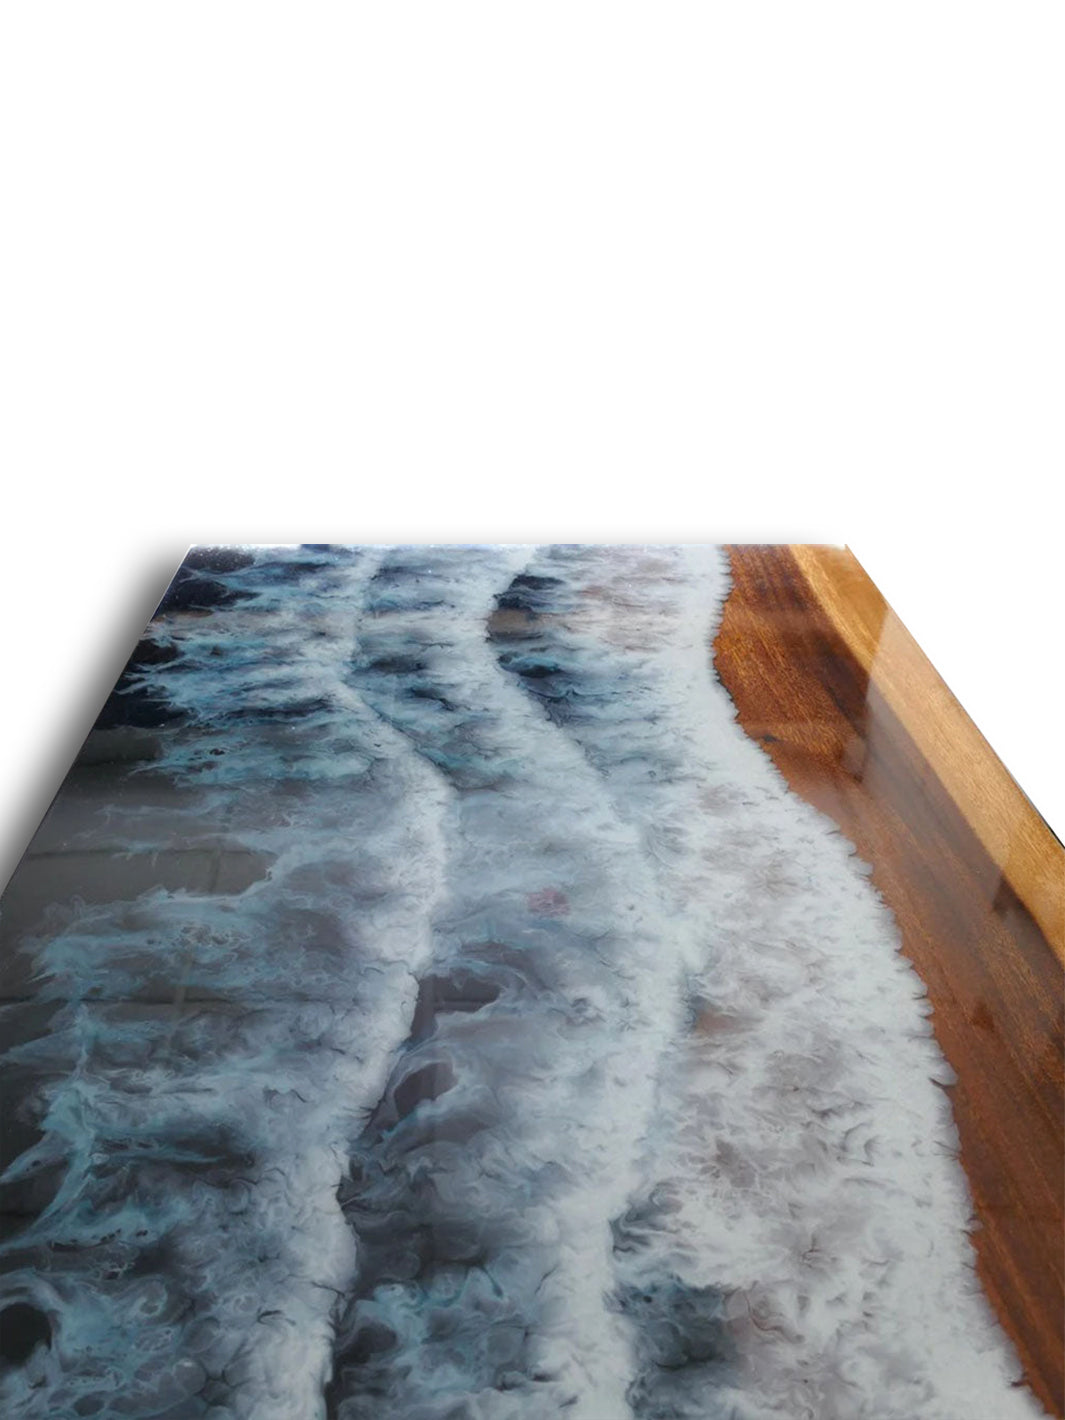 Handcrafted River Beach Epoxy Resin Wooden Coffee Table | 150x55cm Made 4 Decor Tables MDR0005